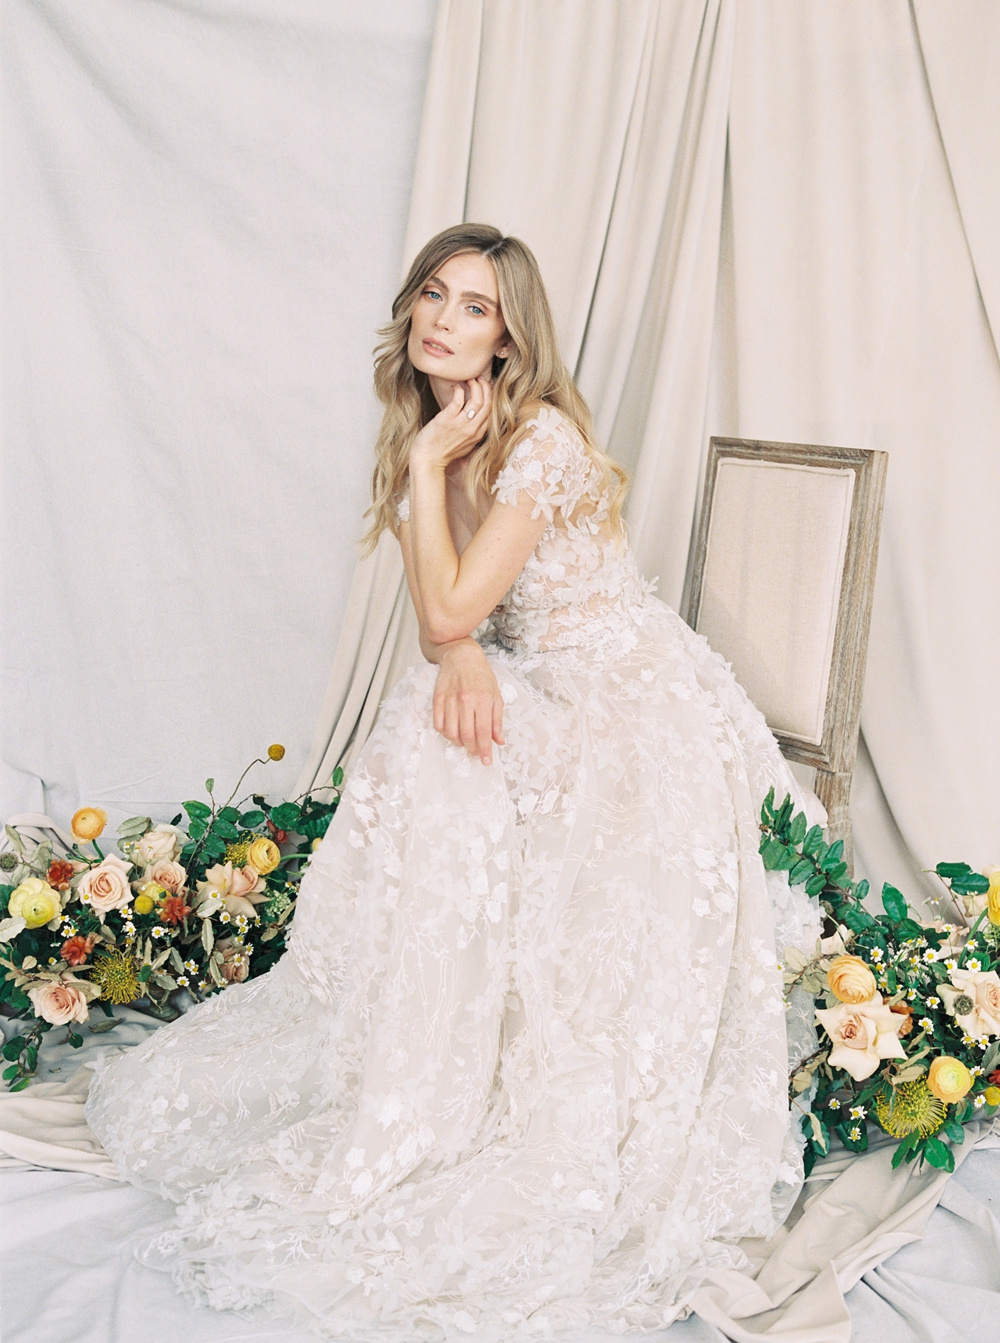 “Keeper of the Bees” | Bridal Editorial featured on Wedding Sparrow by ...